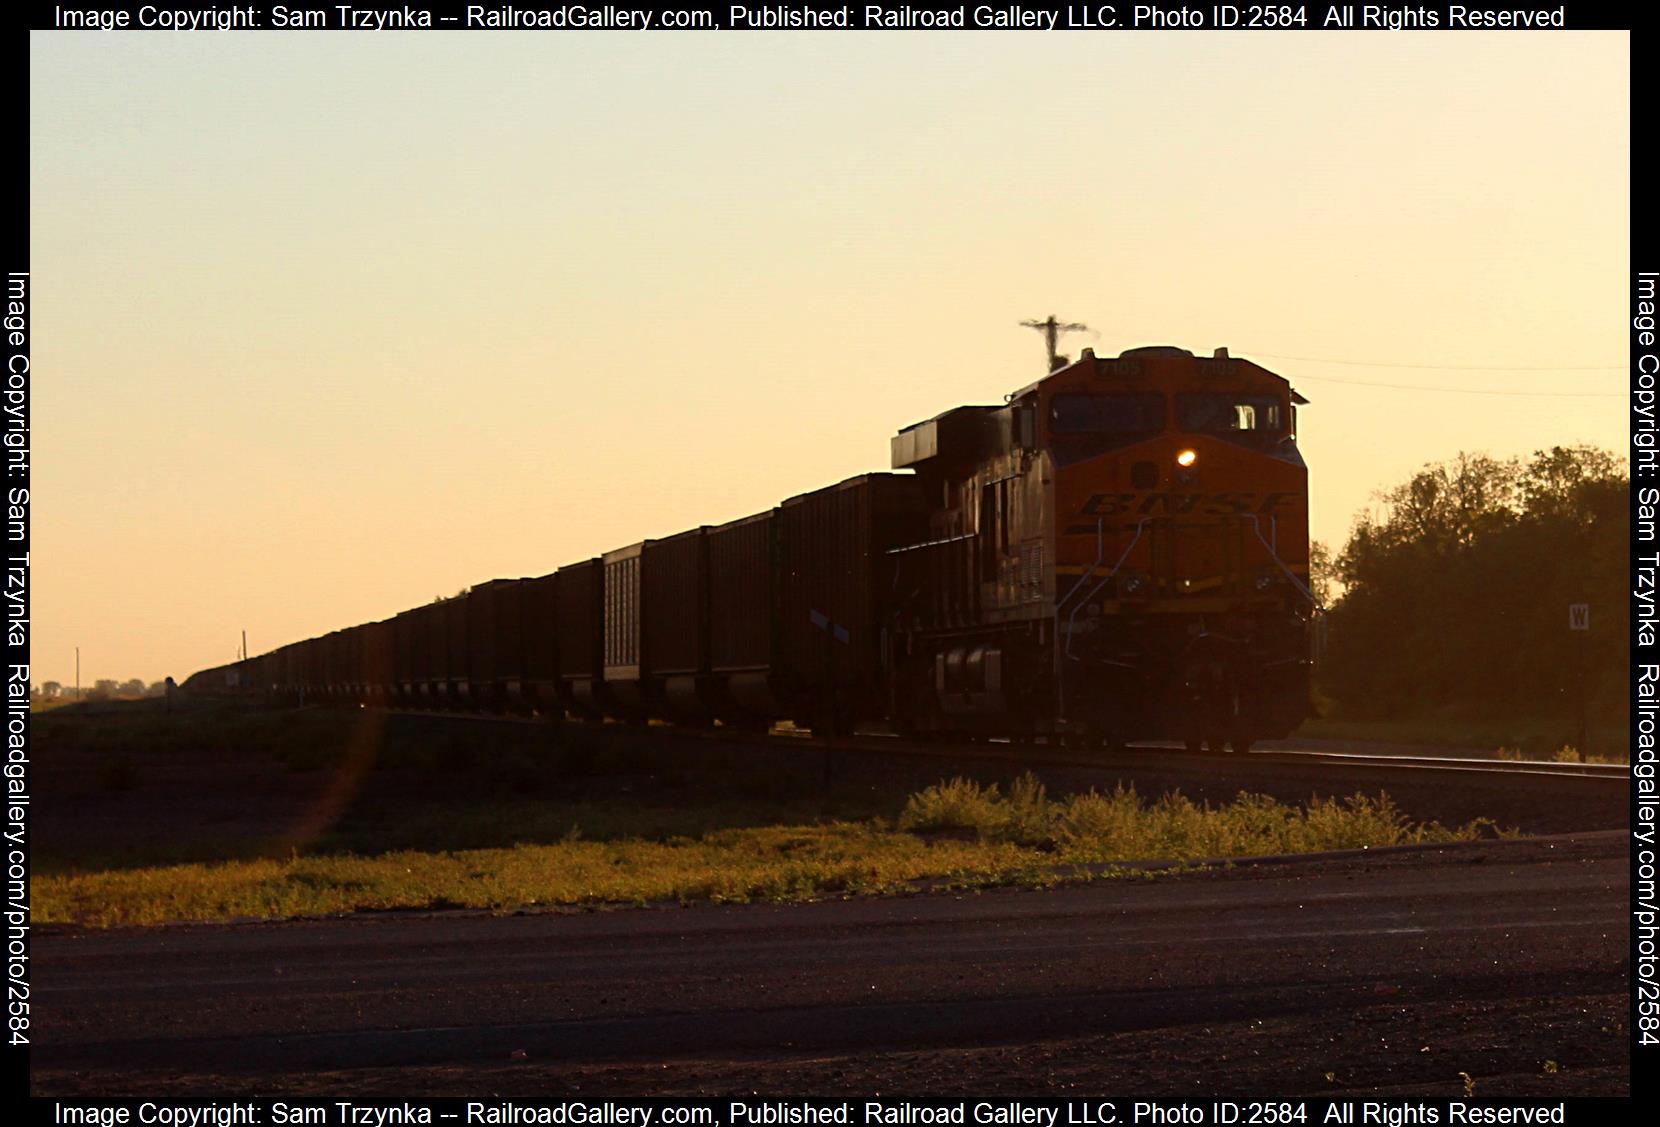 BNSF 7105 is a class GE ES44C4 and  is pictured in Steele, North Dakota, USA.  This was taken along the BNSF Jamestown Subdivision on the BNSF Railway. Photo Copyright: Sam Trzynka uploaded to Railroad Gallery on 12/05/2023. This photograph of BNSF 7105 was taken on Tuesday, August 09, 2022. All Rights Reserved. 